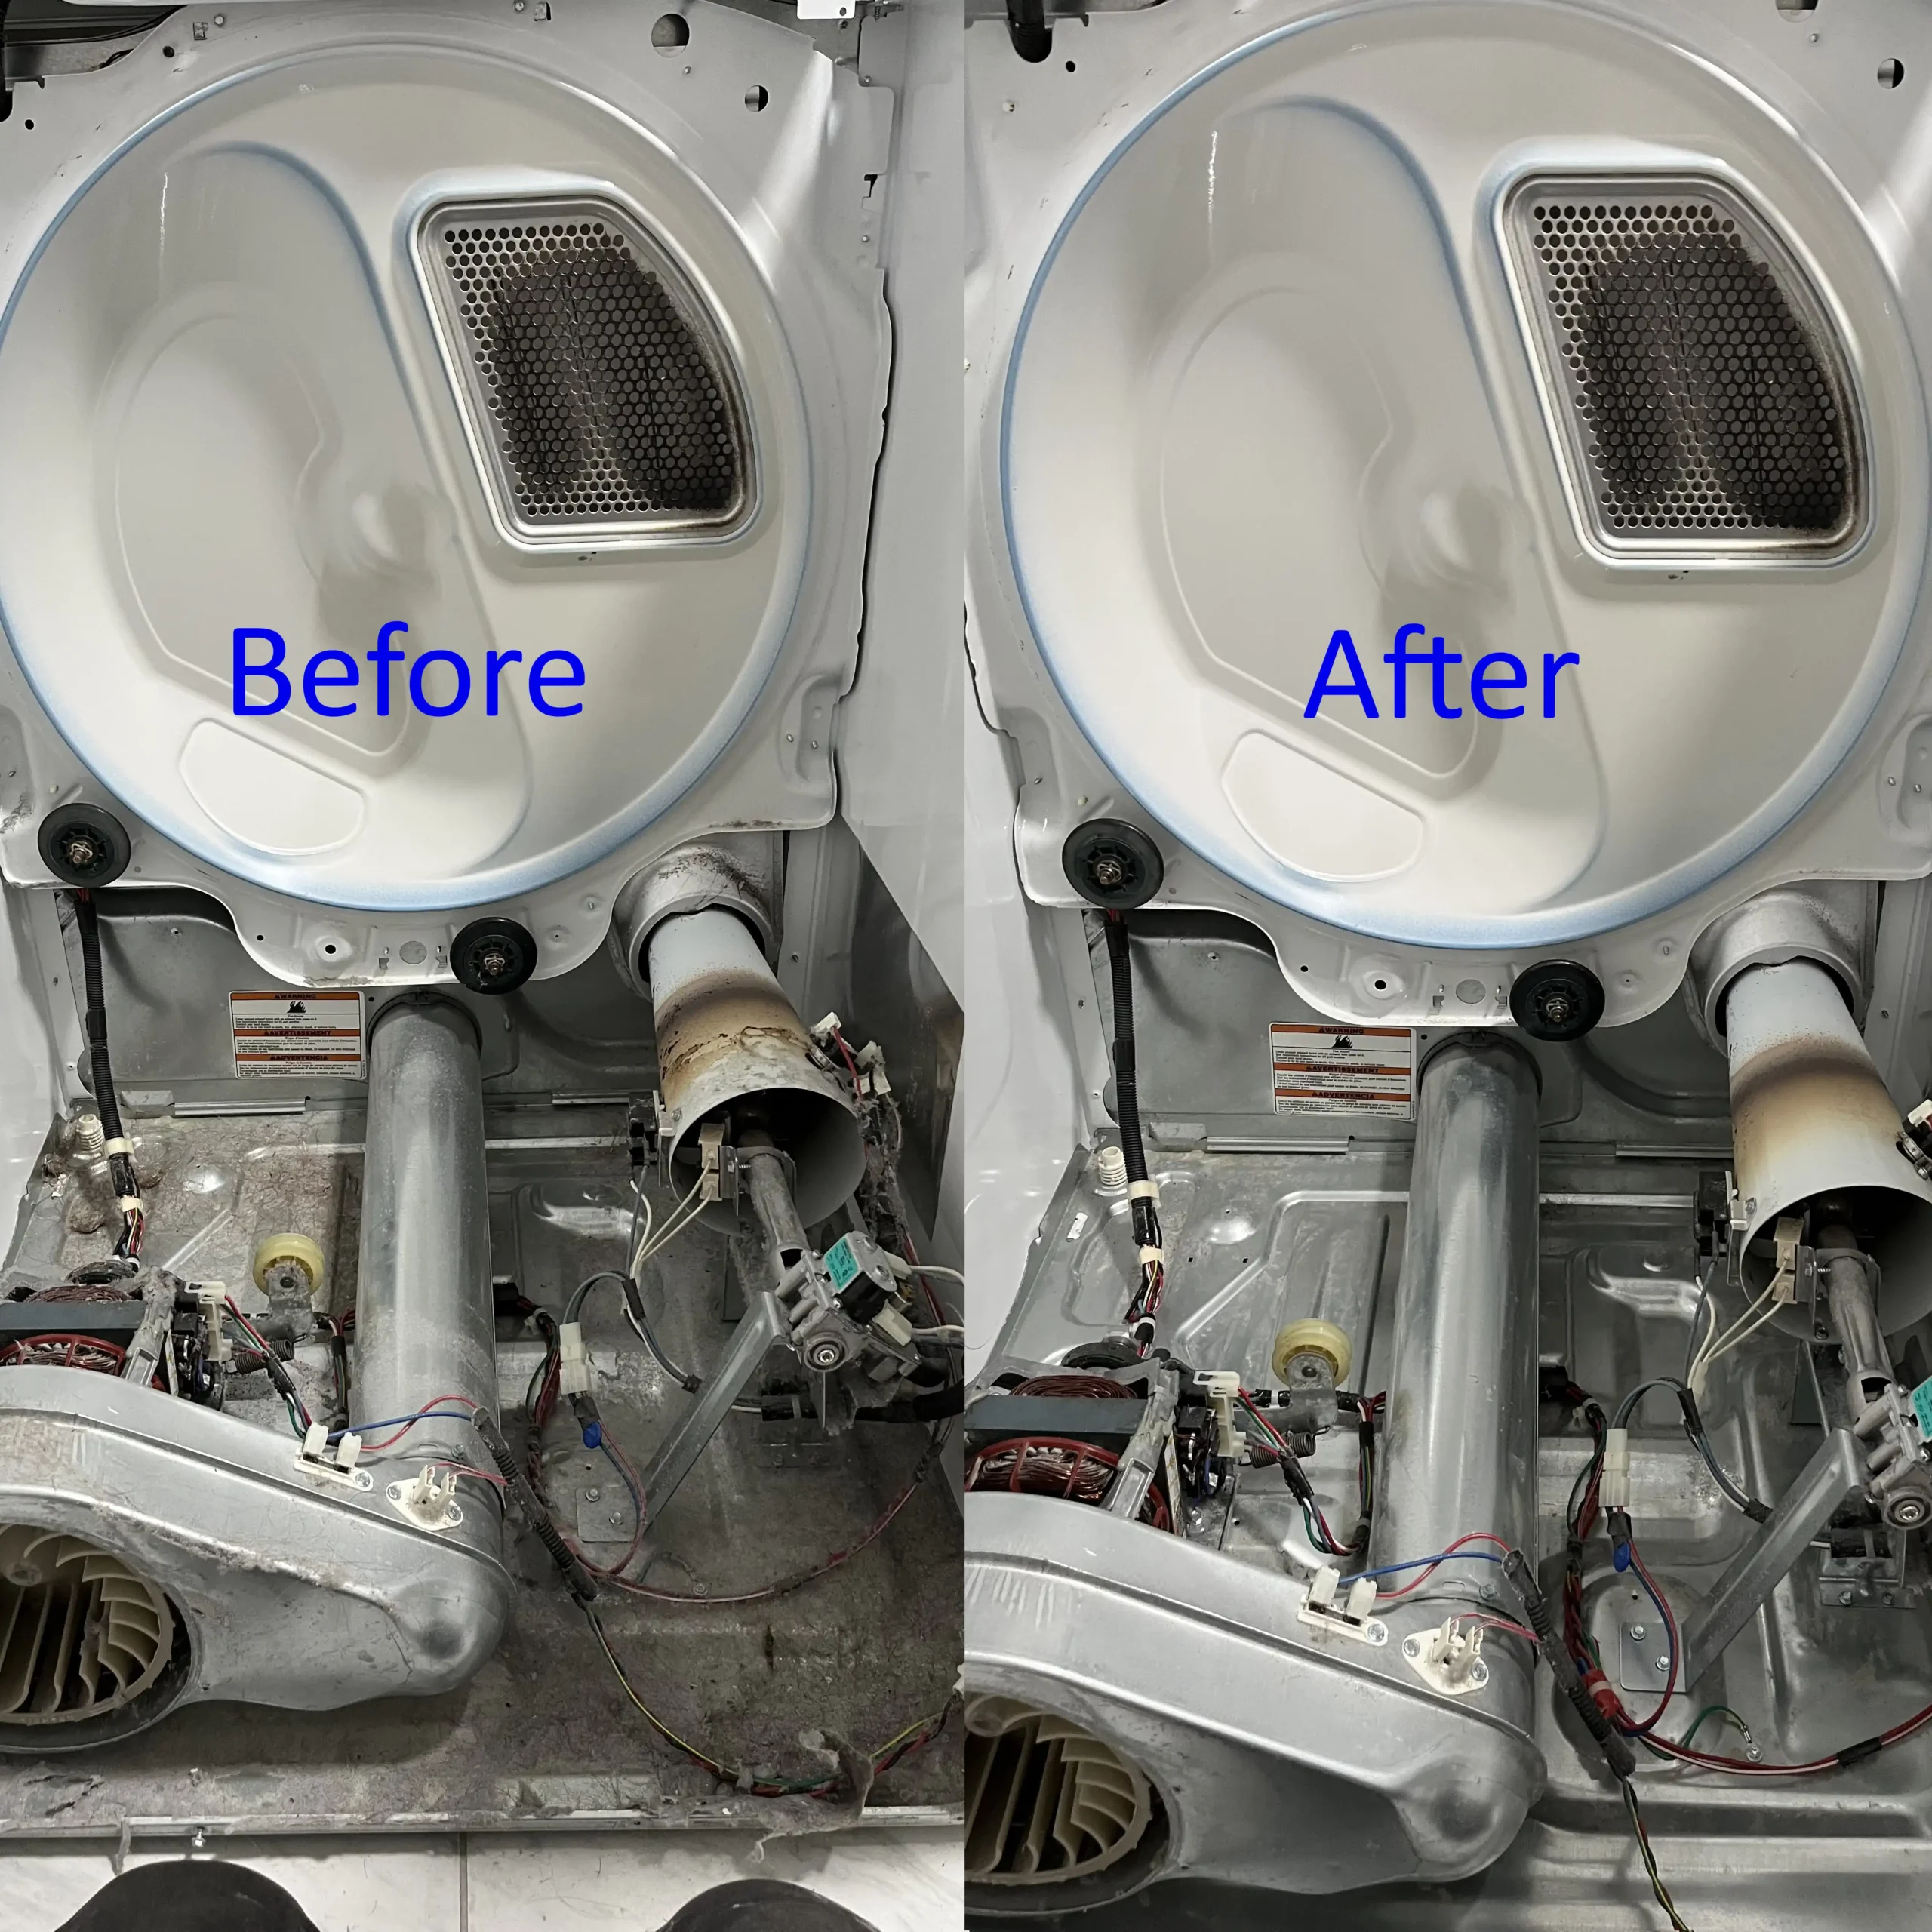 Dryer before and after cleaning